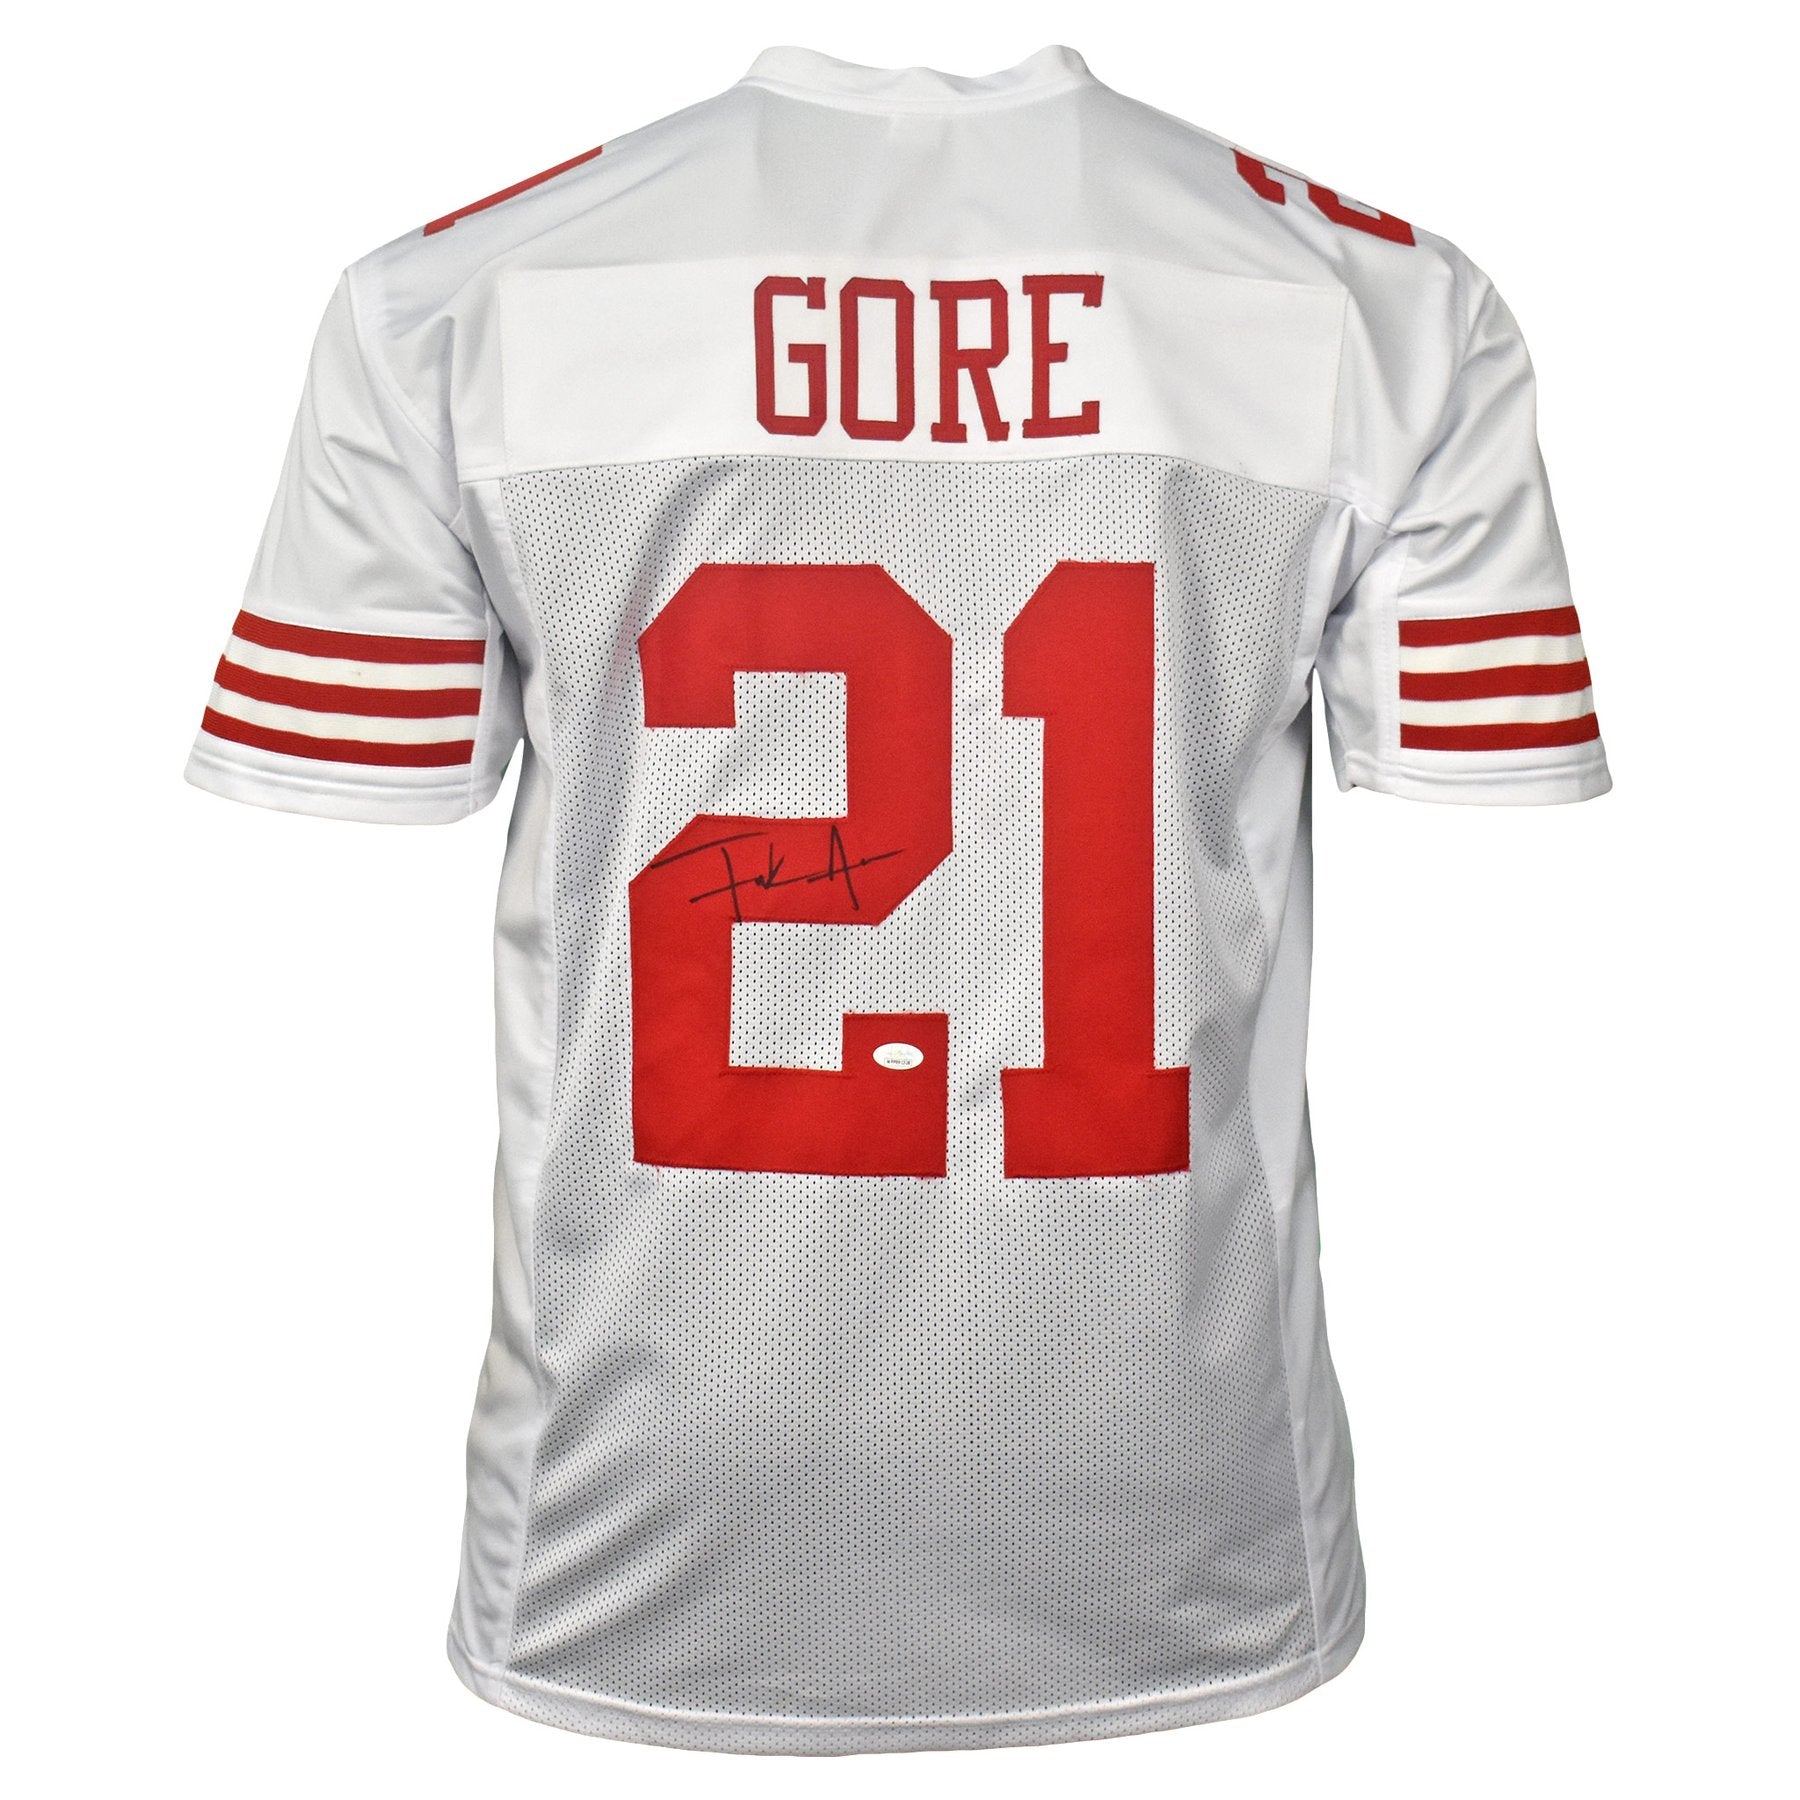 Frank Gore Autographed San Francisco 49ers Football NFL Jersey